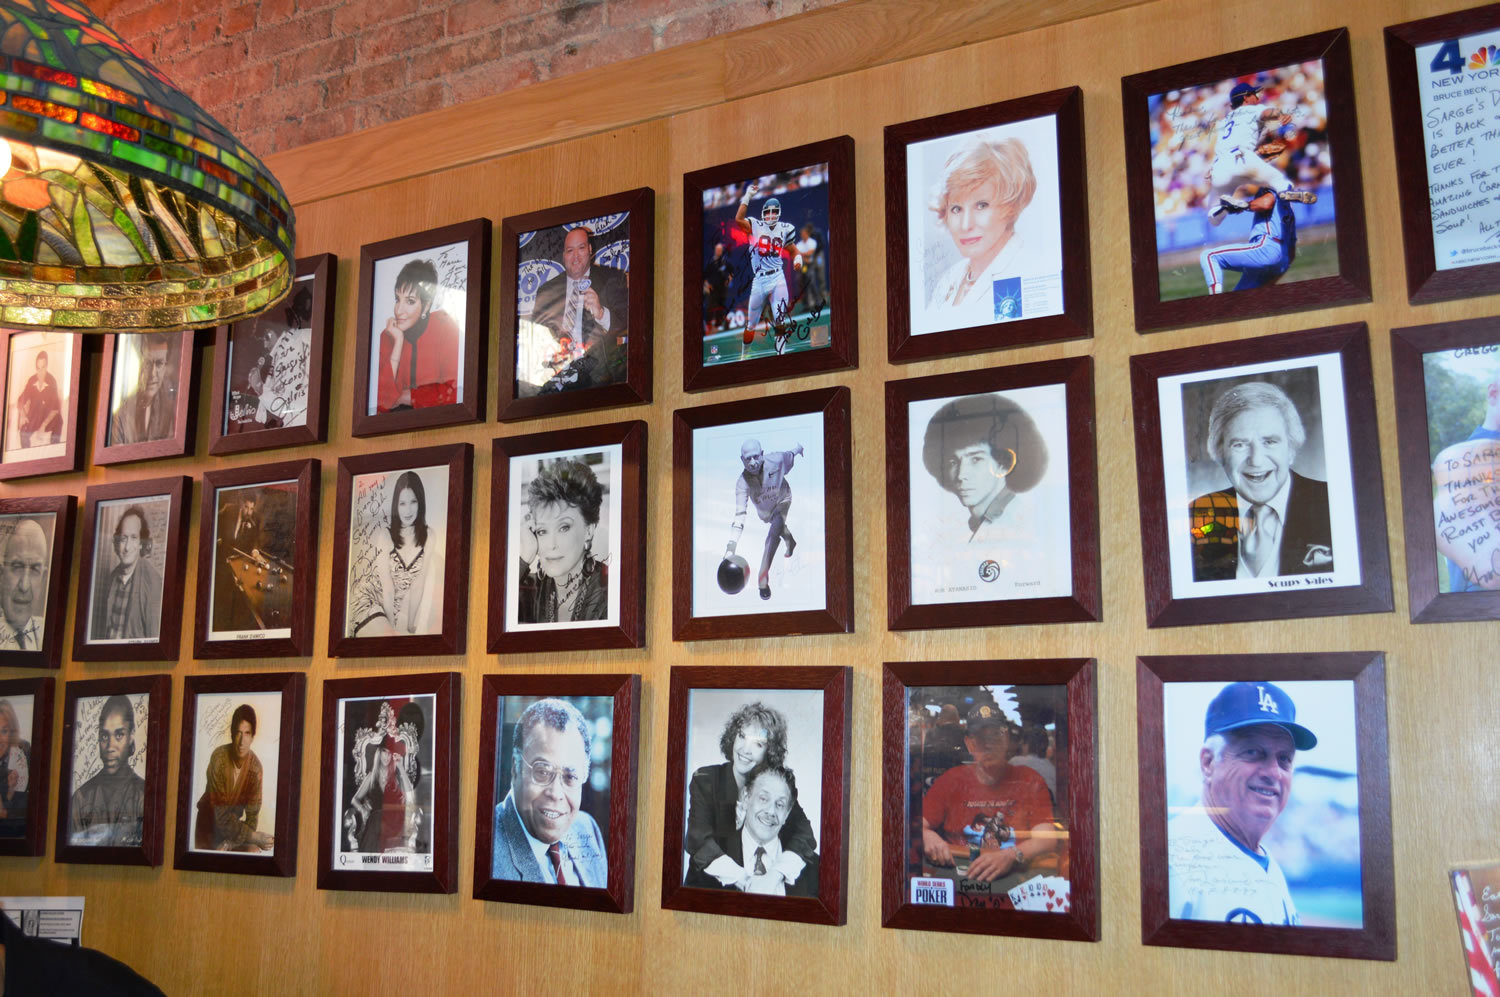 Sarge's "Wall of Celebrities"